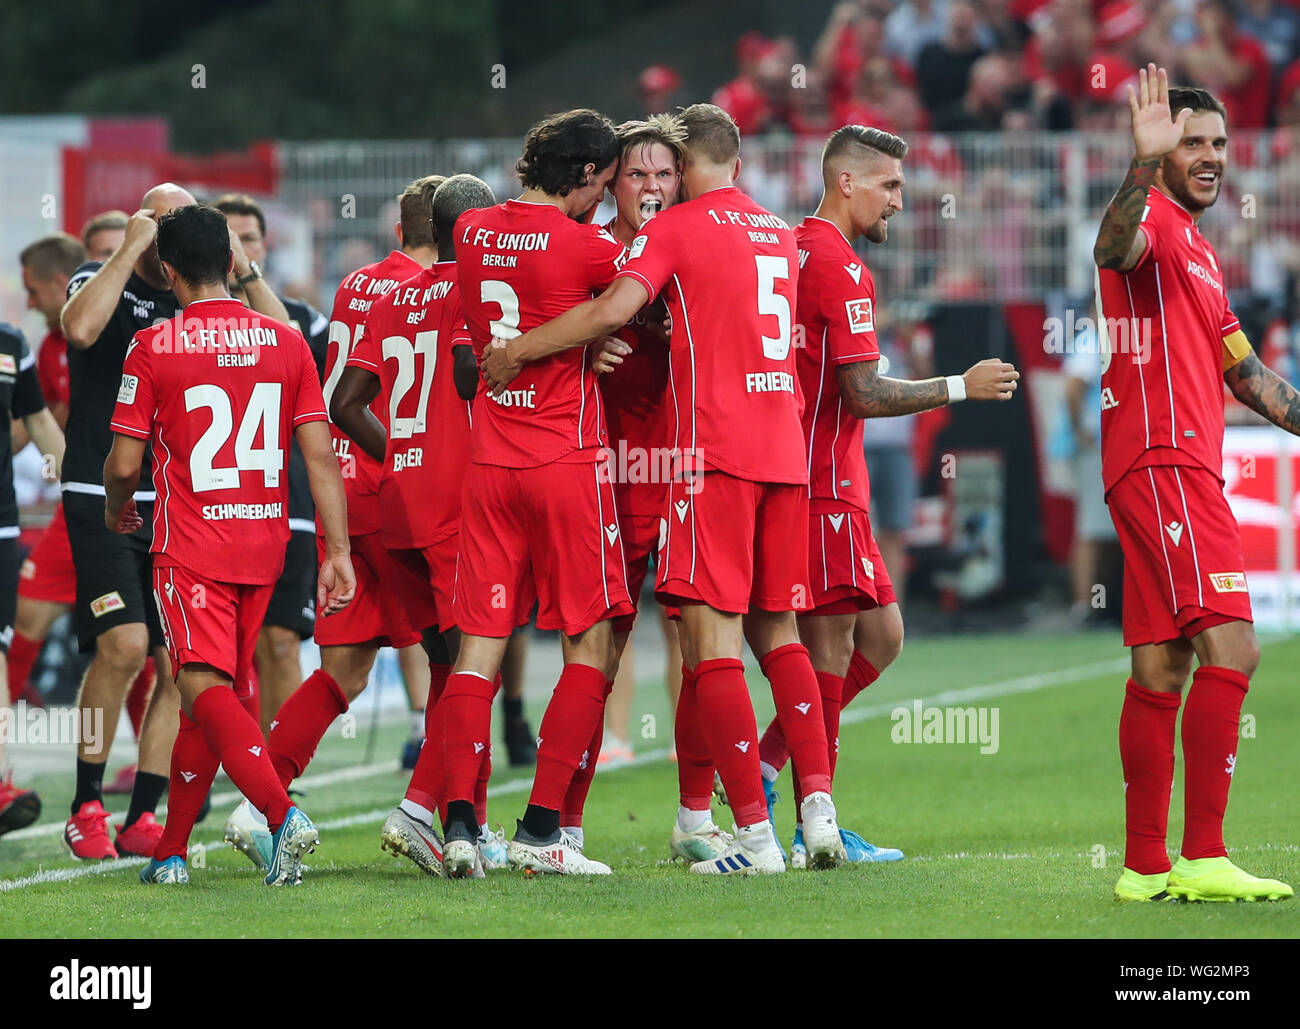 Berlin, Germany. 31st Aug, 2019. Marius Buelter (4th R) of Union Berlin celebrates his scoring with teammates during a German Bundesliga match between 1.FC Union Berlin and Borussia Dortmund in Berlin, capital of Germany, on Aug. 31, 2019. Credit: Shan Yuqi/Xinhua/Alamy Live News Stock Photo